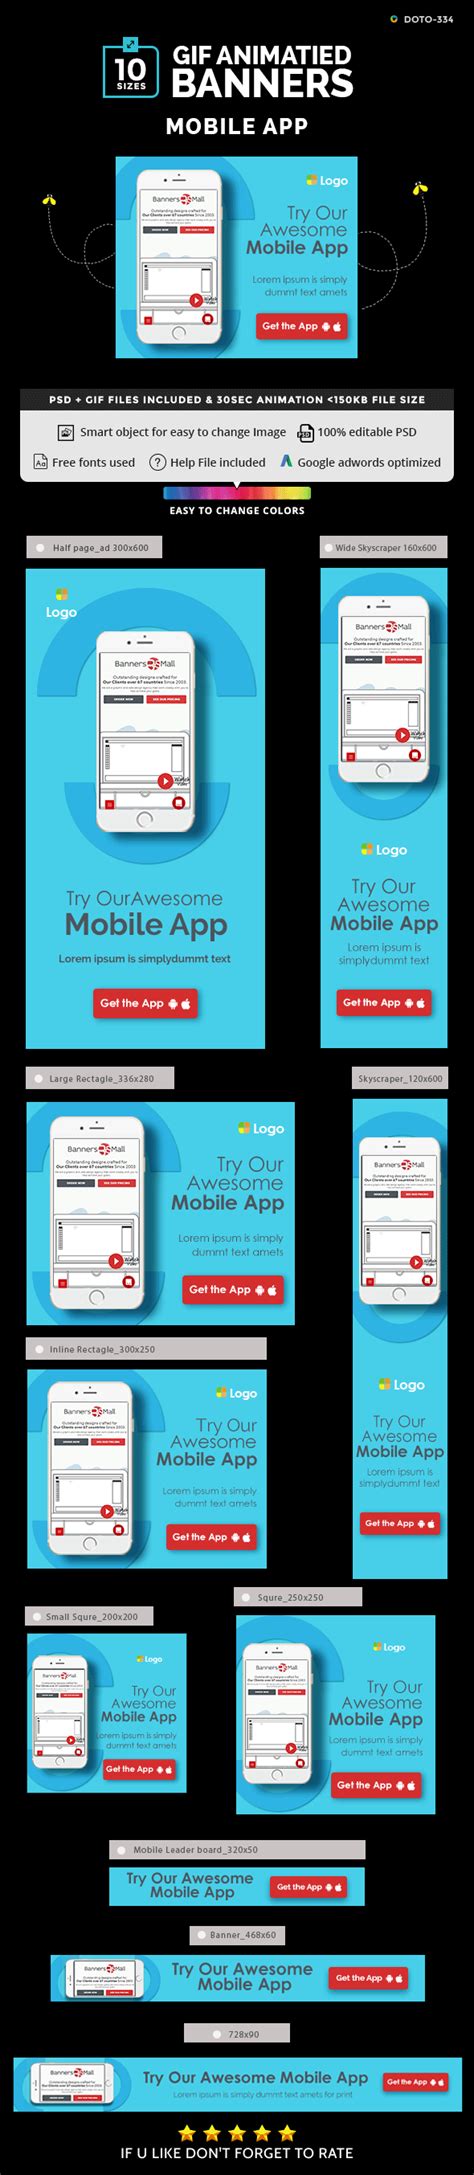 Mobile App Animated Gif Banners | Banner, Mobile app, Animated banners